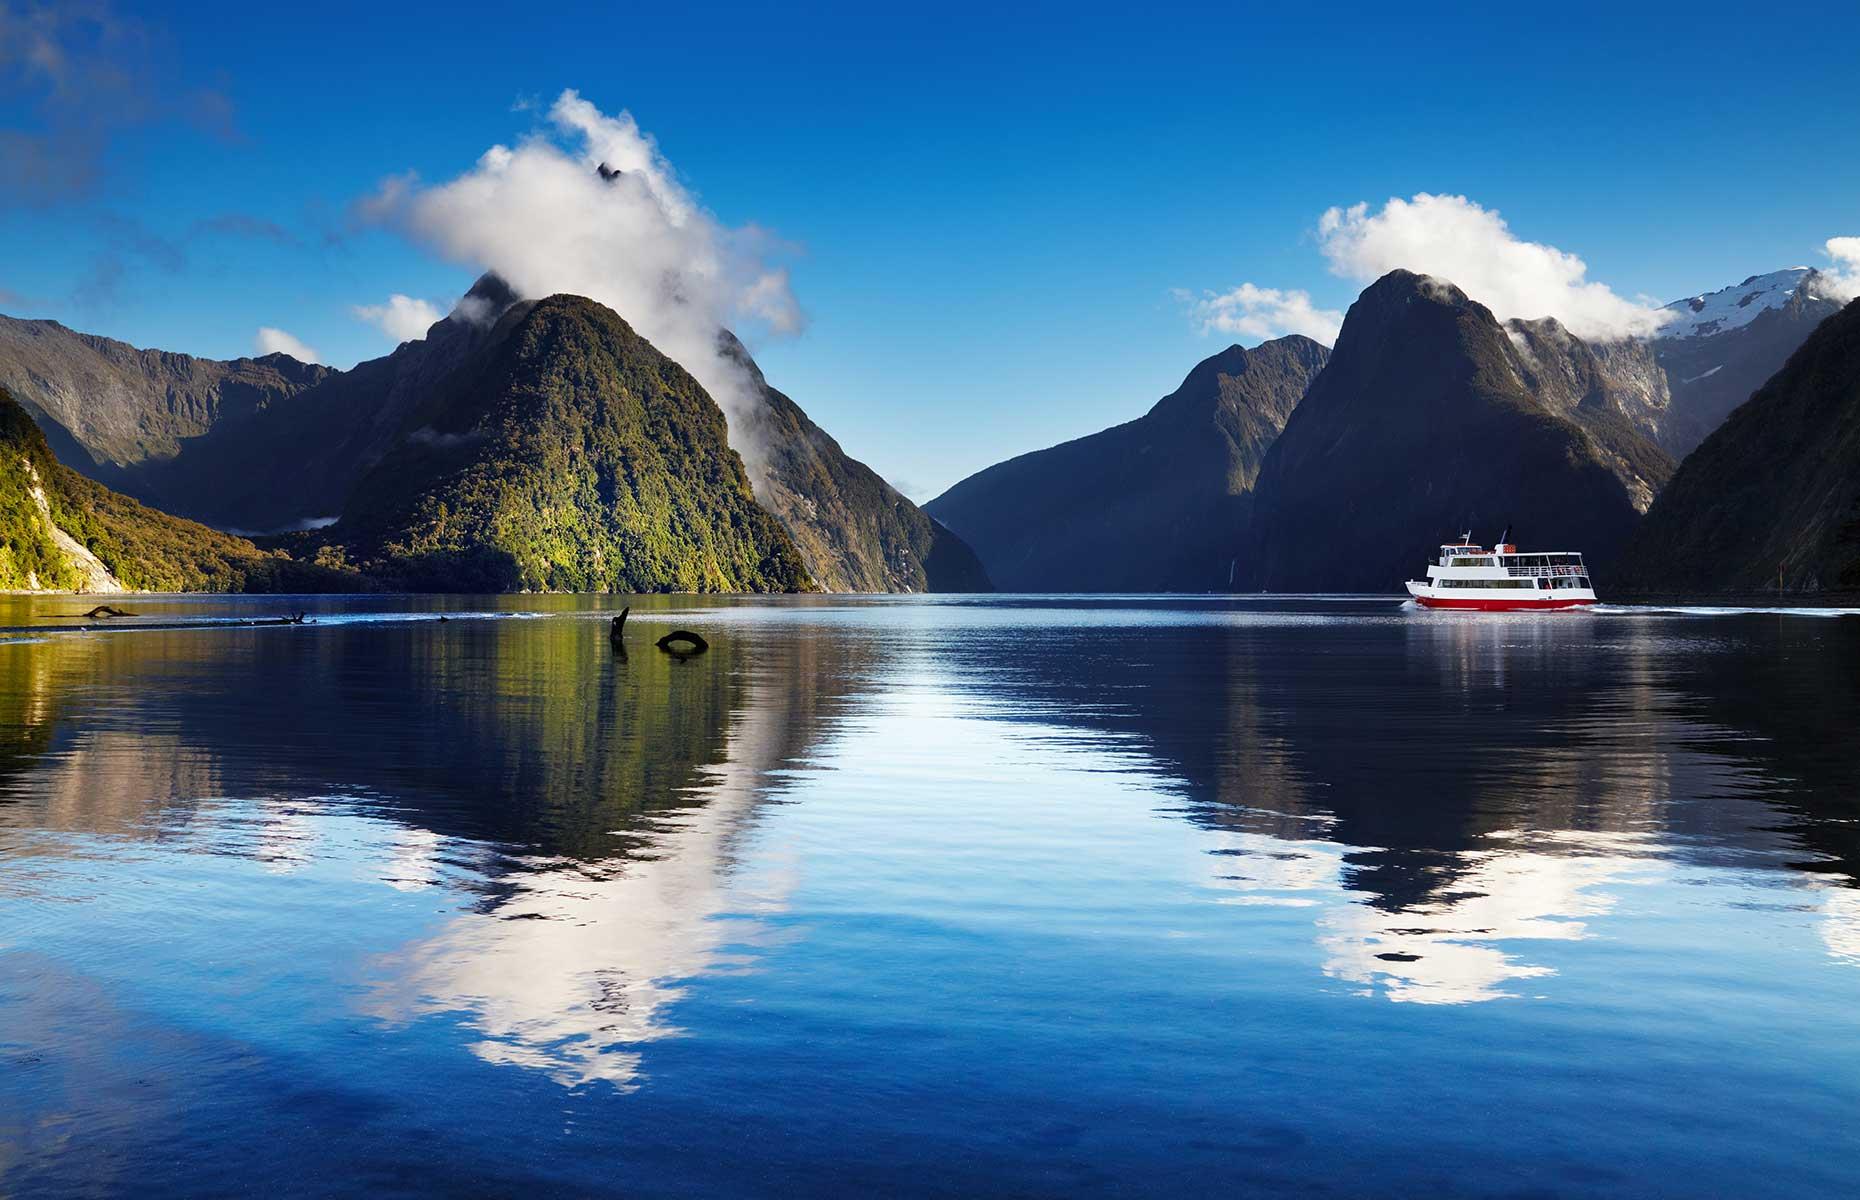 <p>South Island’s Fiordland National Park is one of the most pristine and spectacular places on the planet. The vast fiord known as Milford Sound, or Piopiotahi in the Māori language, has sheer rock walls rising 5,522 feet (1,683m) and a daytime or overnight cruise gives a unique perspective.</p>